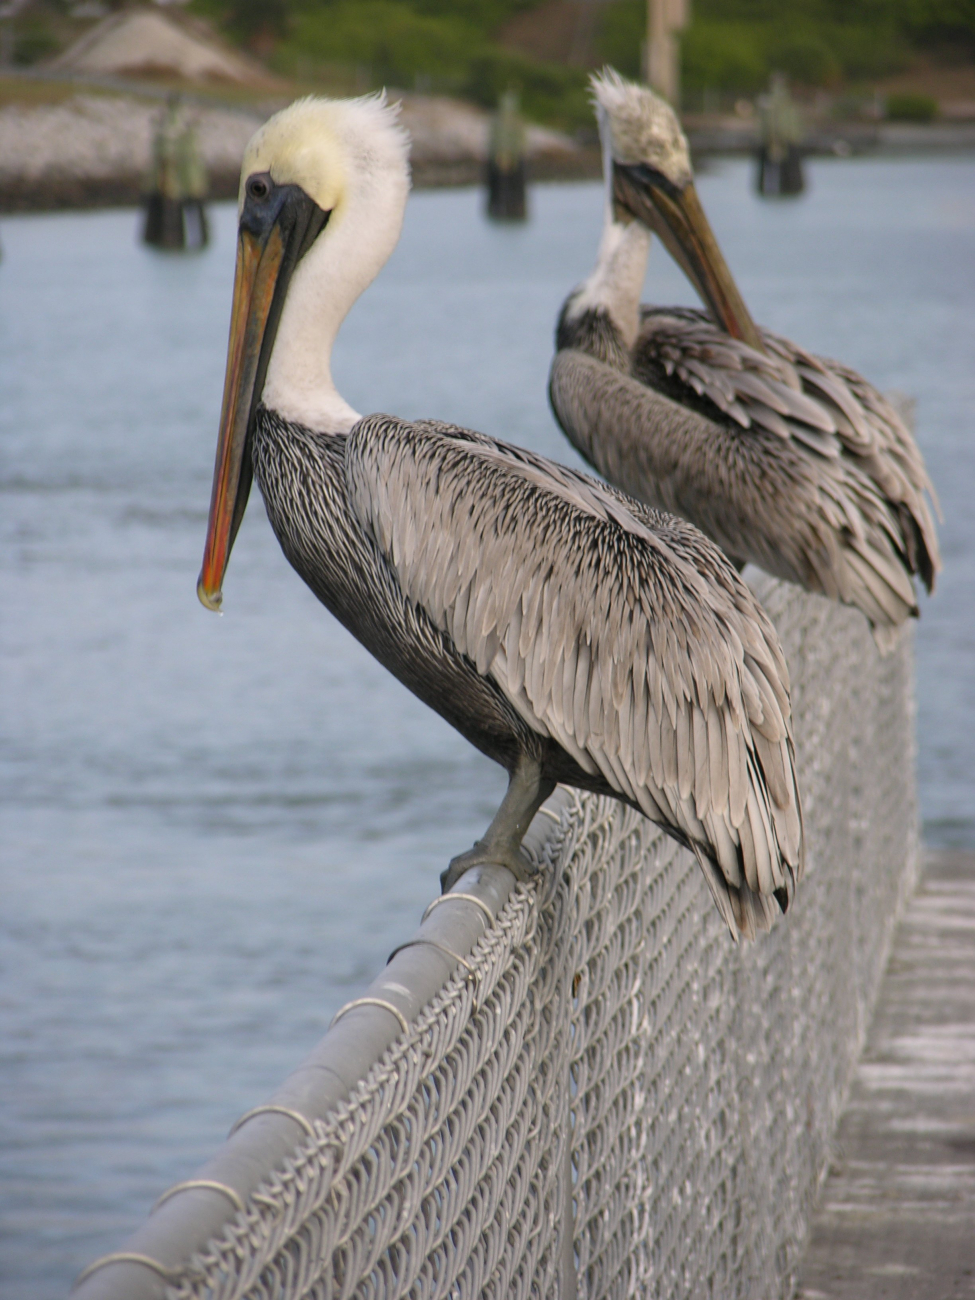 Pelicans on a fence